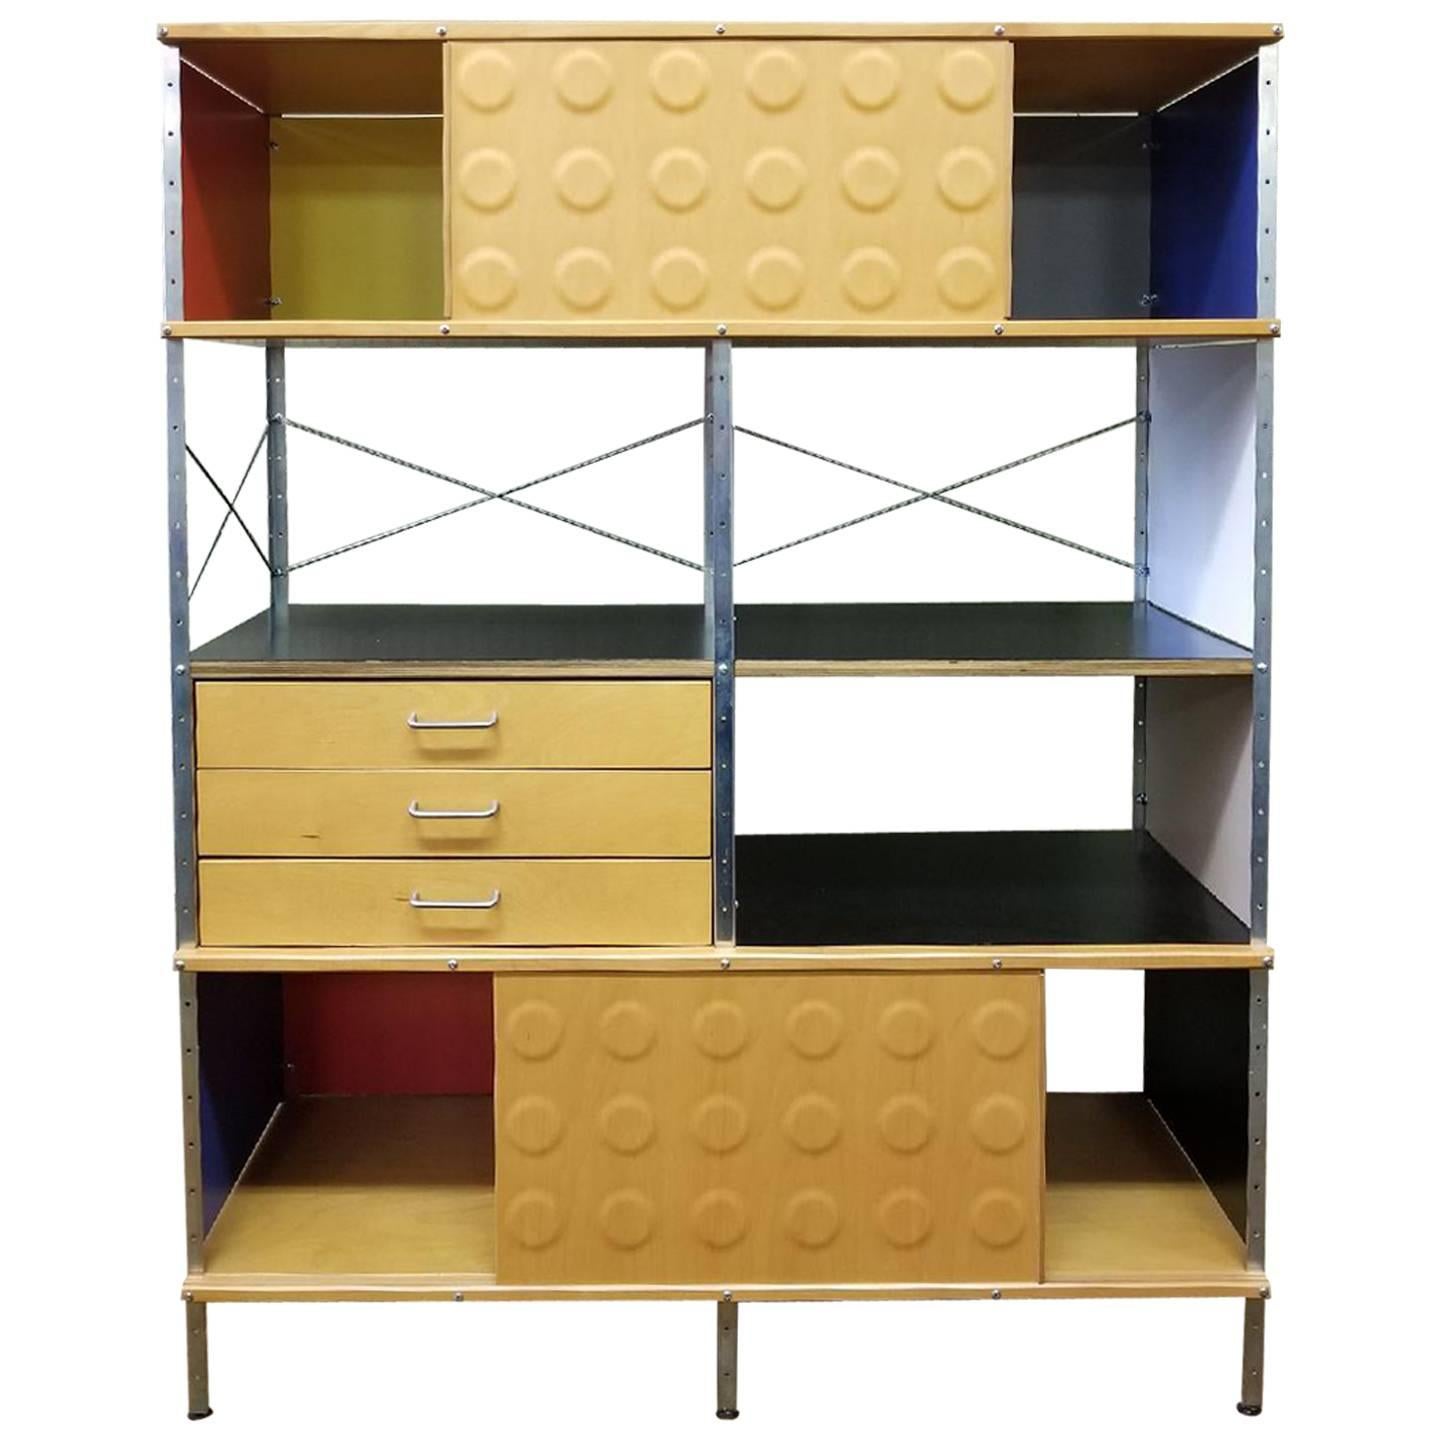 Storage Unit Designed by Charles & Ray Eames for Herman Miller